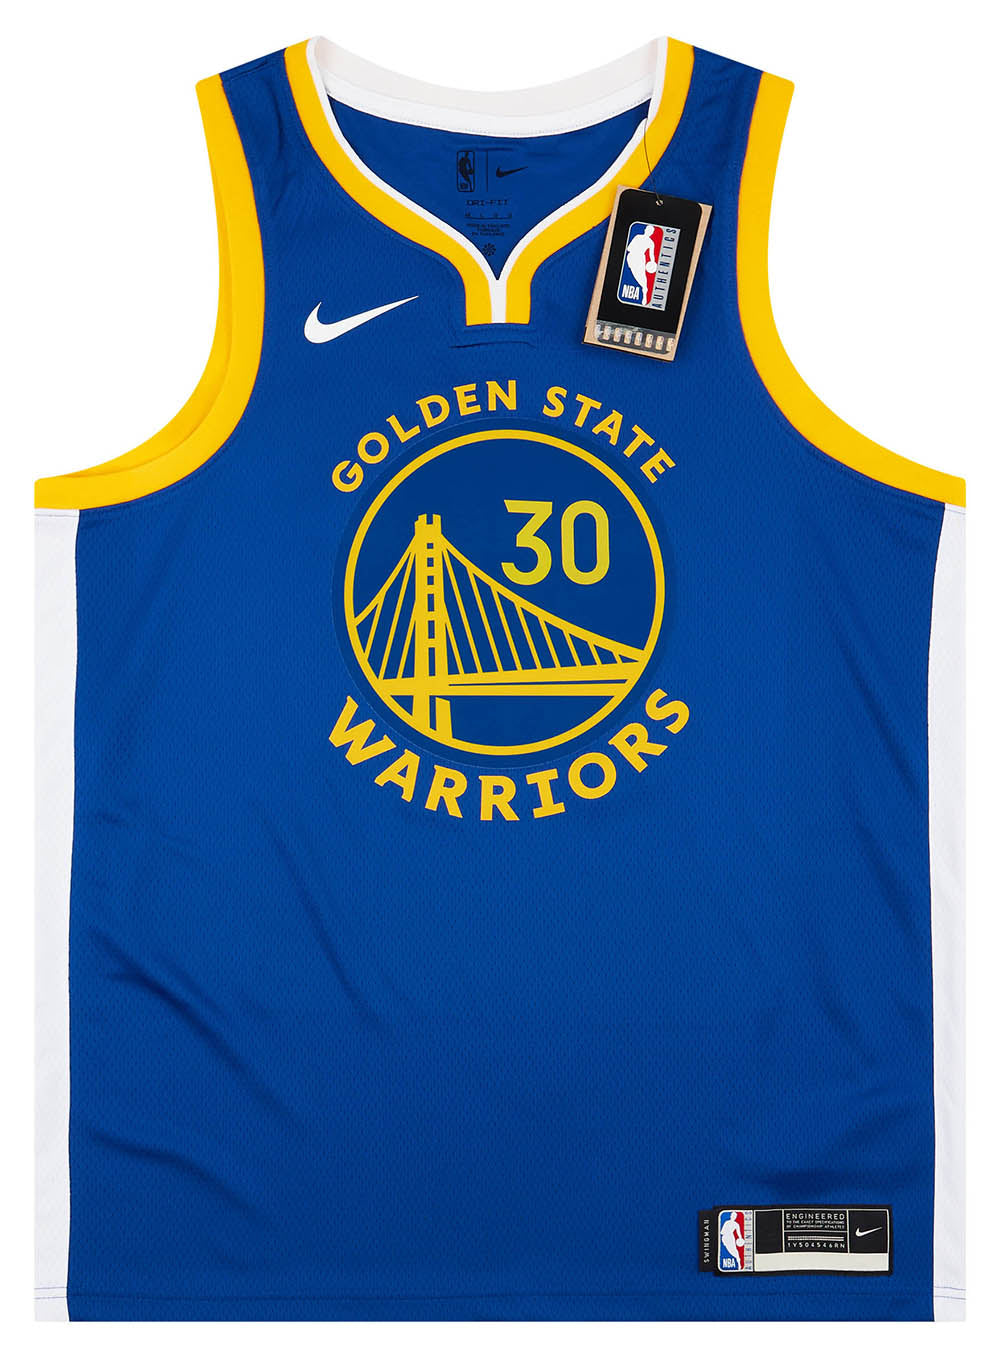 San francisco NEW golden state warriors jersey stephen curry